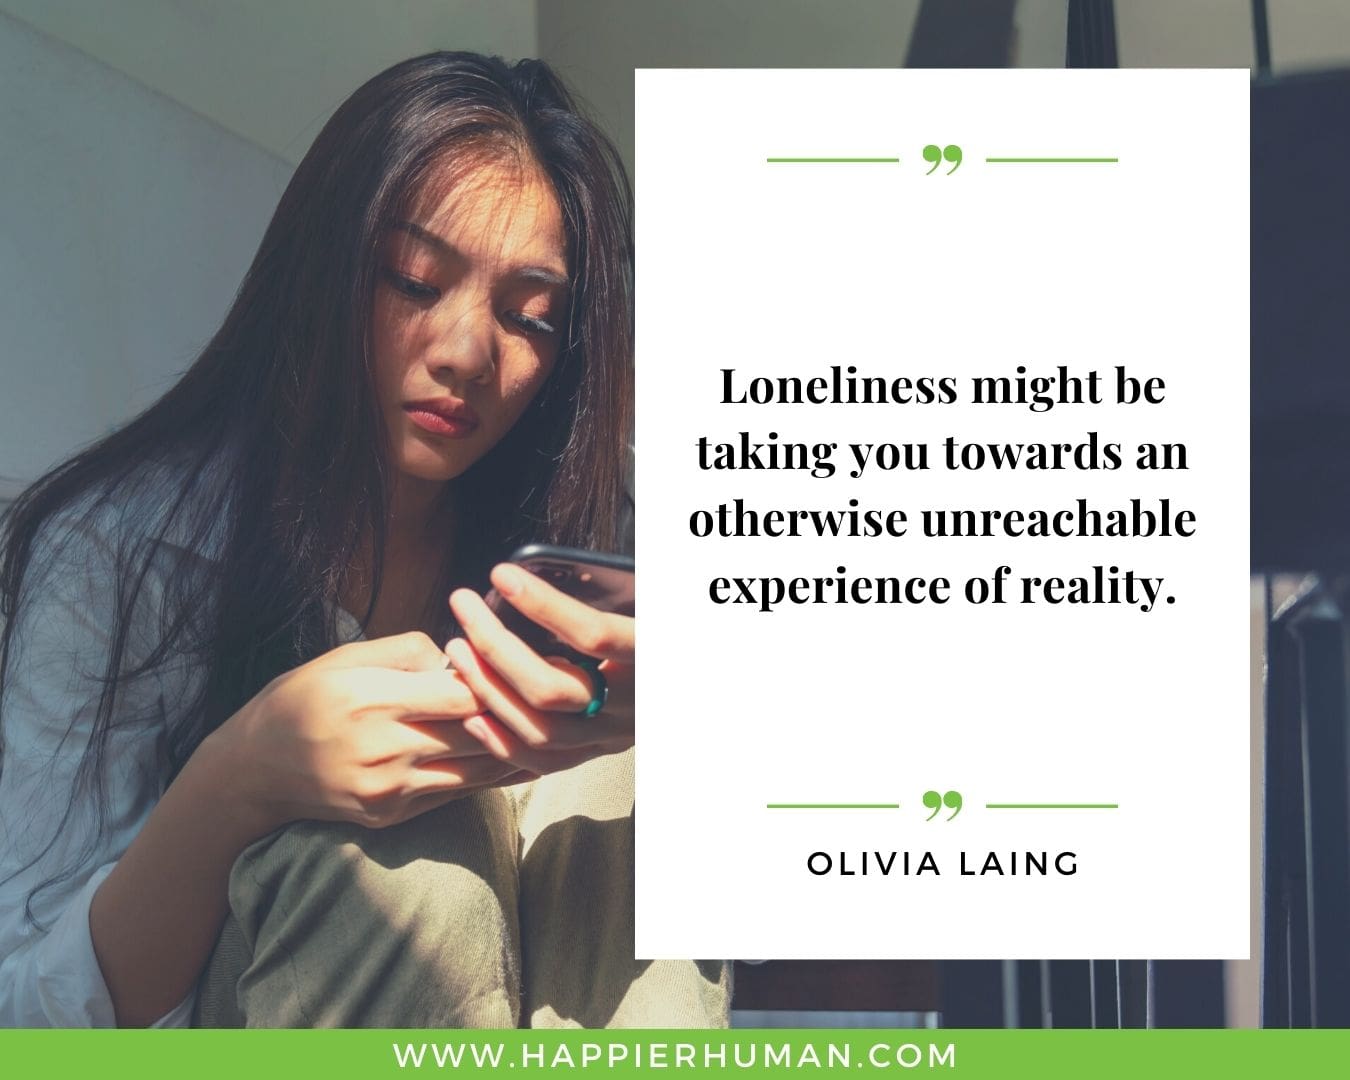 Loneliness Quotes - “Loneliness might be taking you towards an otherwise unreachable experience of reality.” – Olivia Laing